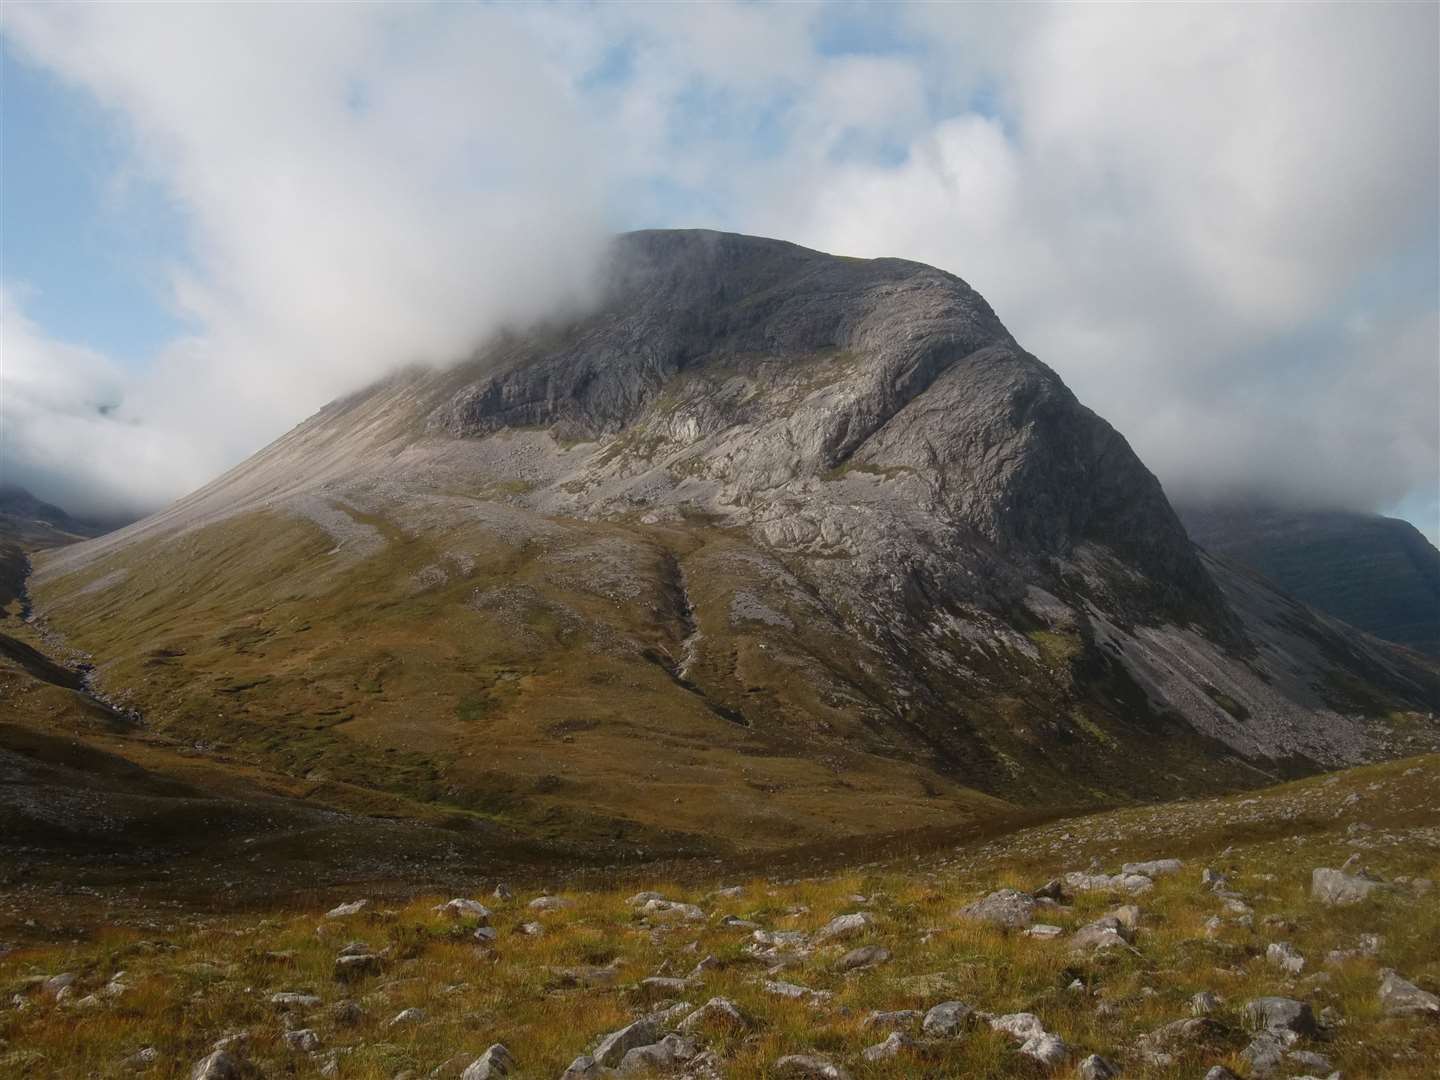 Heading over rough ground to the burn under Ruadh-stac Bheag, whose rocky northern ramparts are now clear.